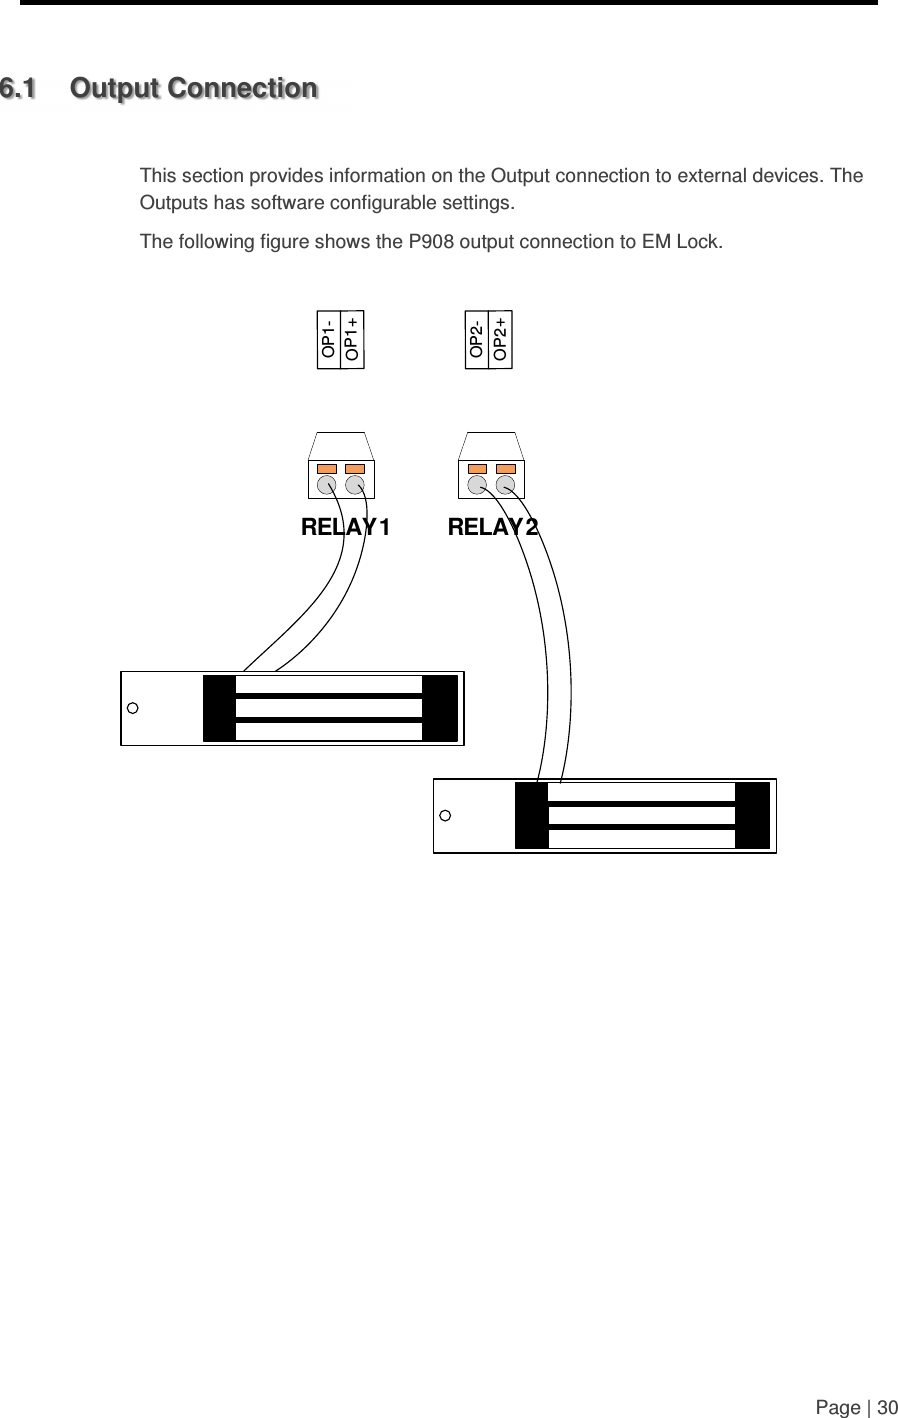     Page | 30   6.1  Output Connection  This section provides information on the Output connection to external devices. The Outputs has software configurable settings.  The following figure shows the P908 output connection to EM Lock.  RELAY1 RELAY2OP1-OP1+OP2-OP2+           